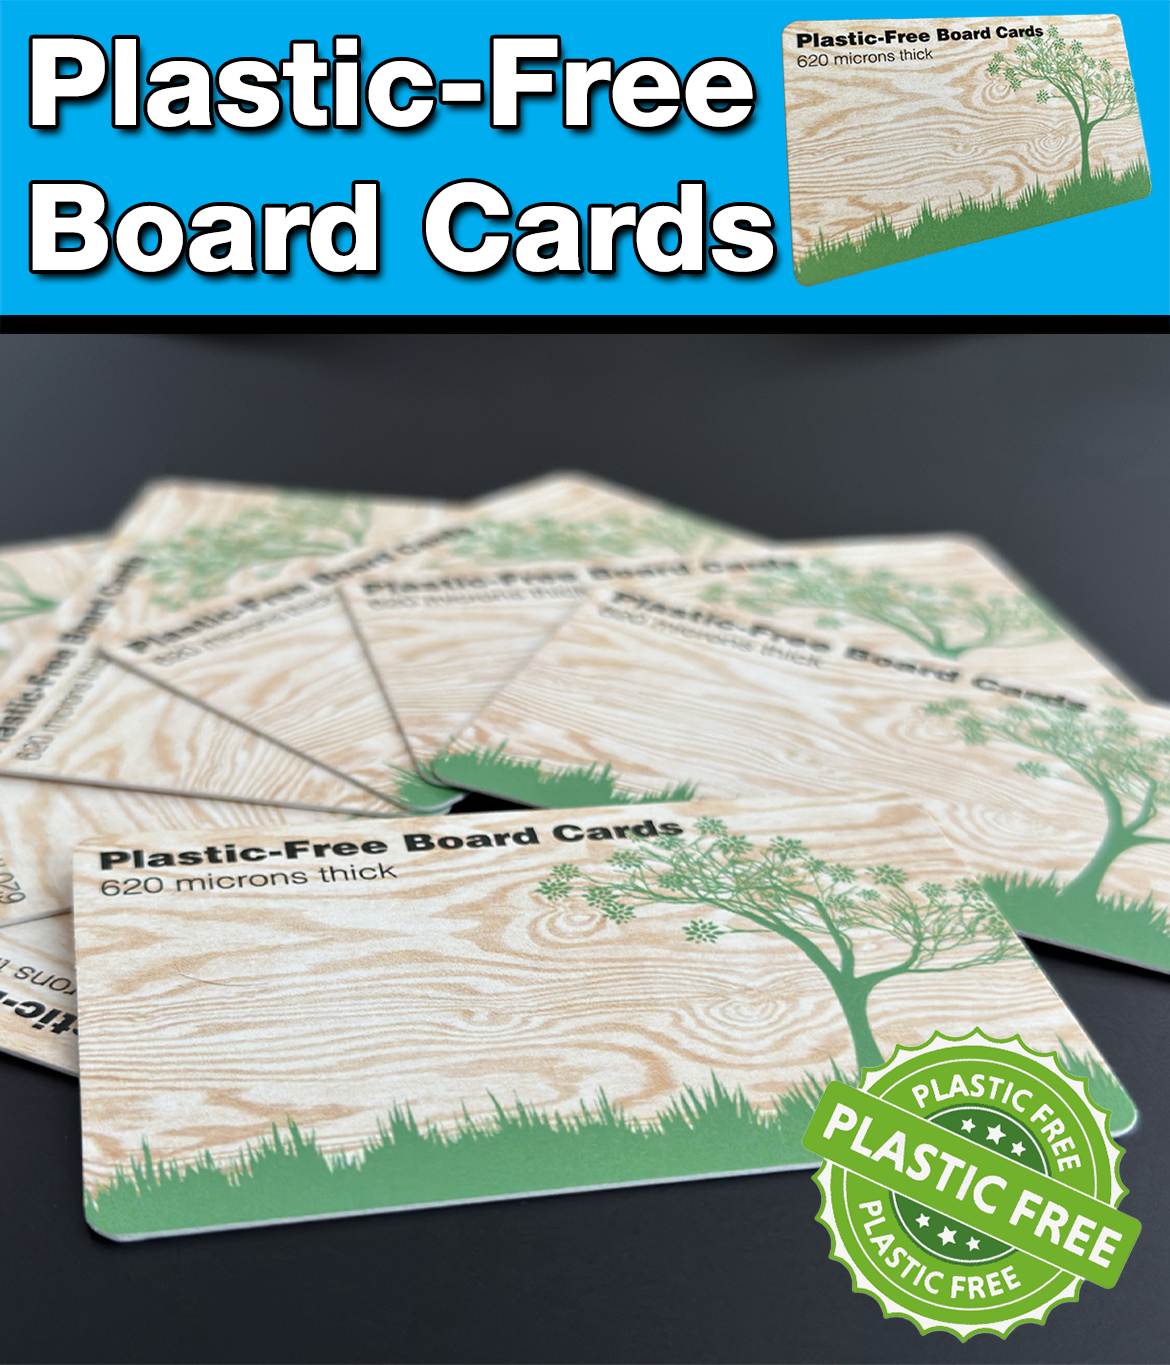 Plastic-Free Board Cards printed